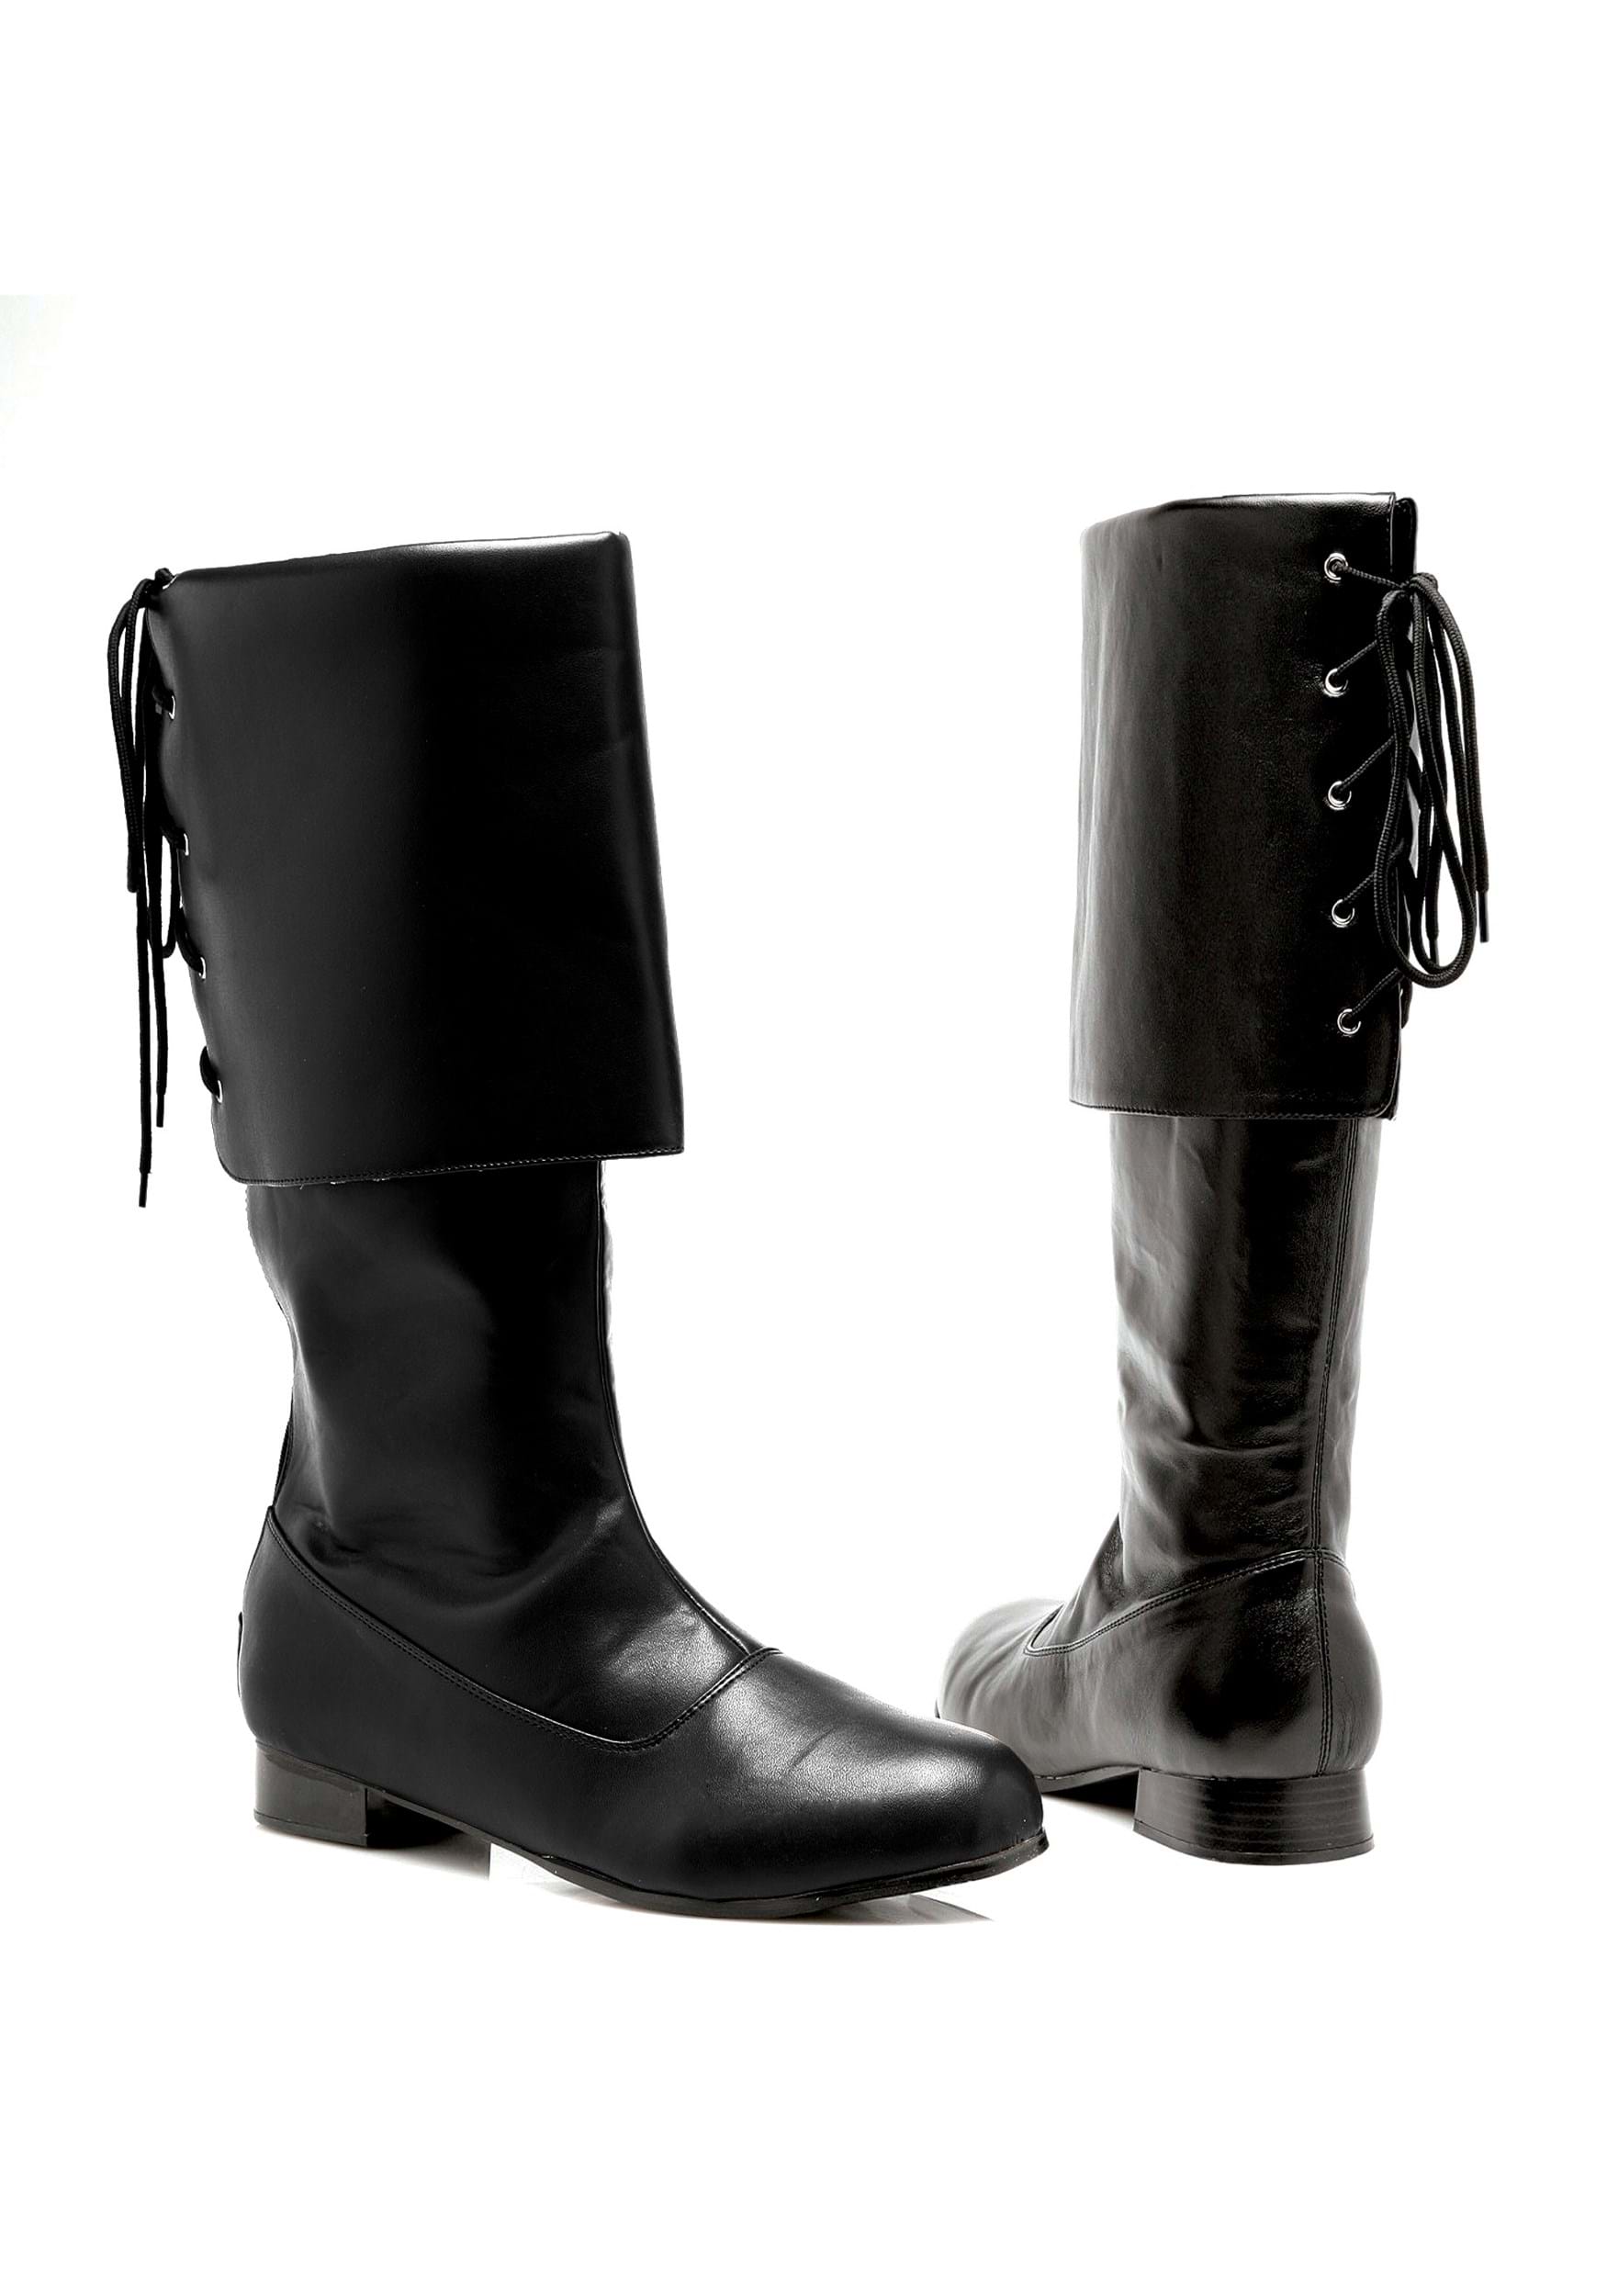 Image of Women's Black Pirate Boots ID EE121SPARROW-M